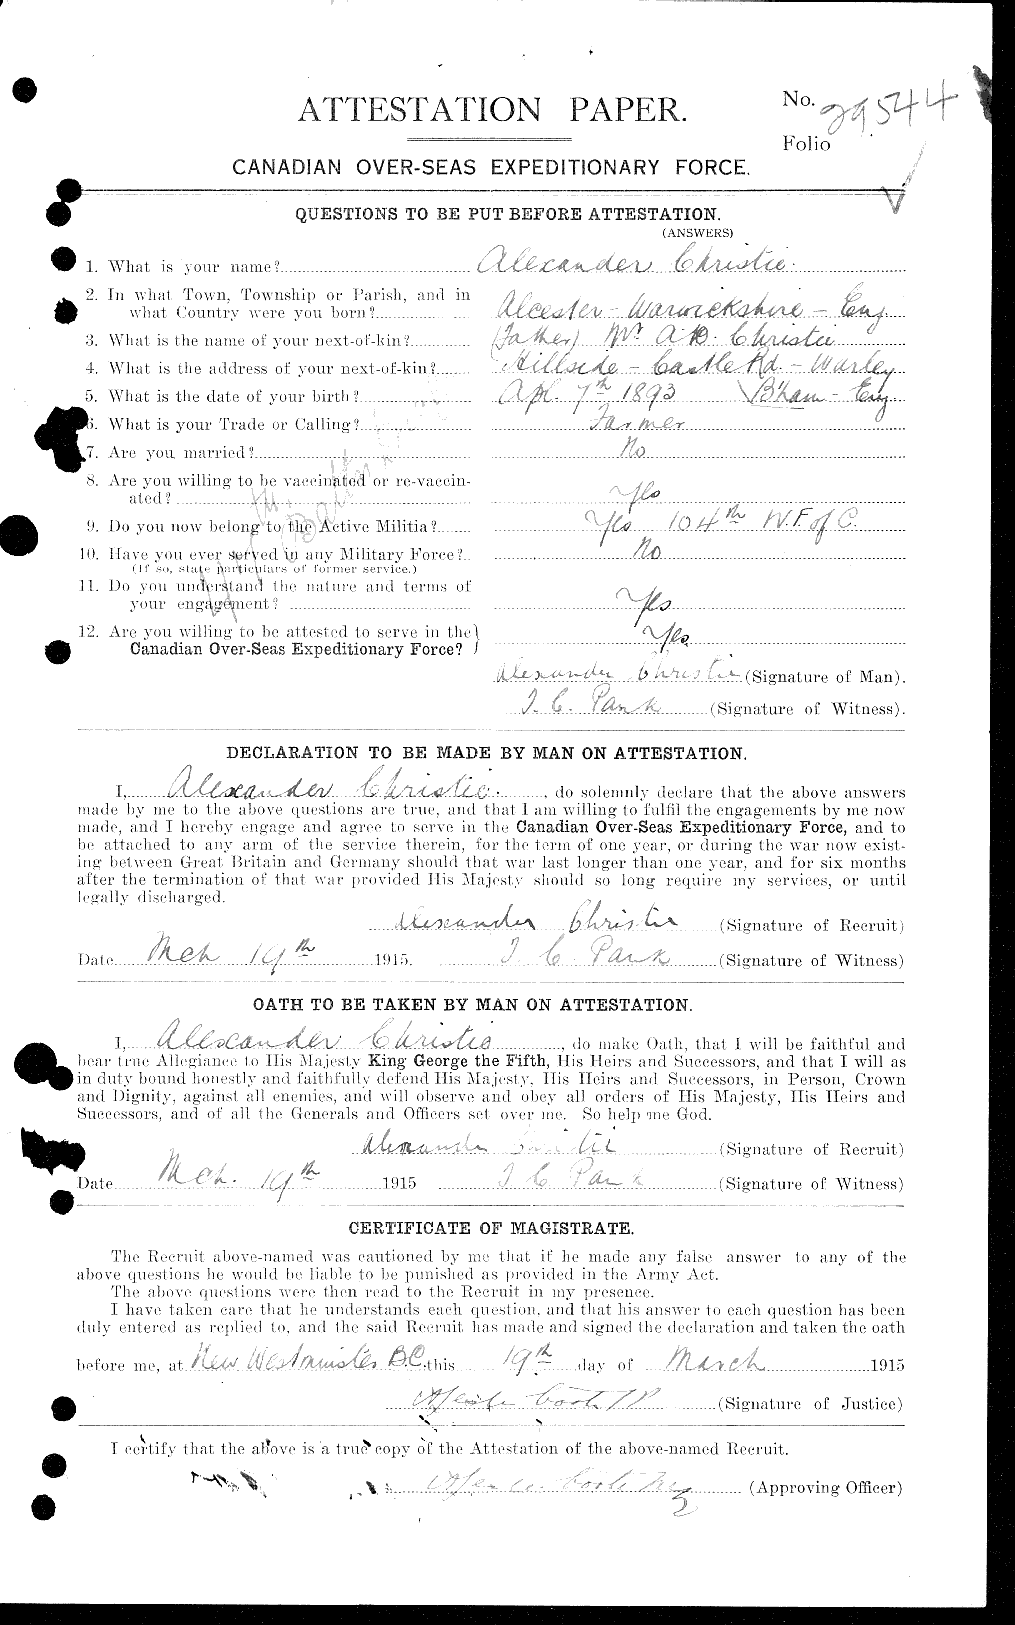 Personnel Records of the First World War - CEF 021858a